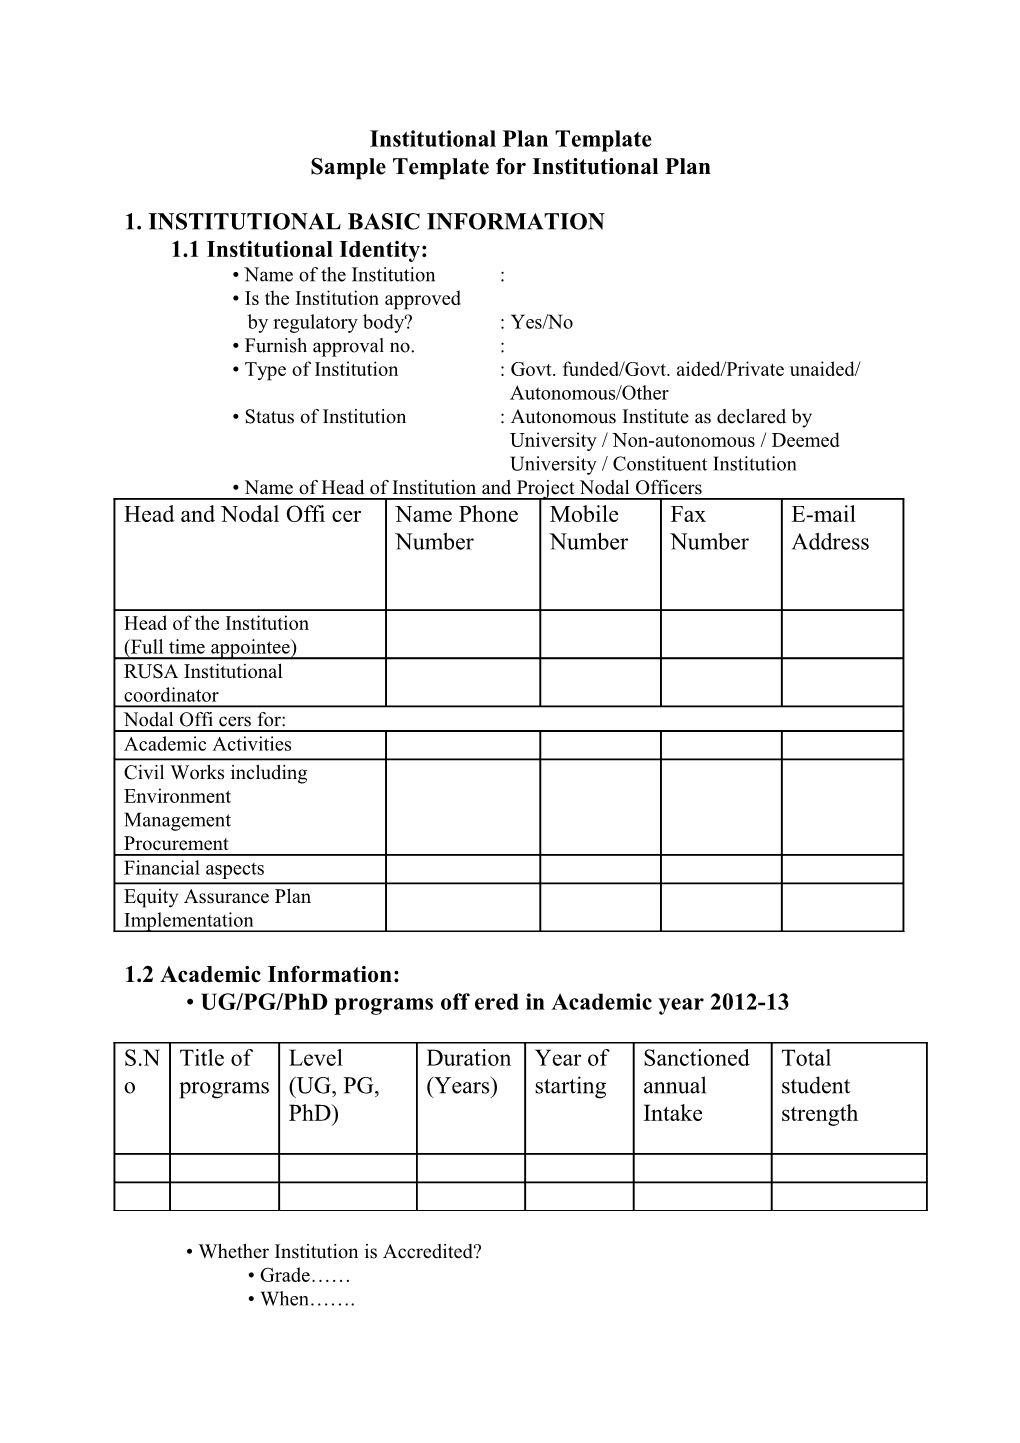 Sample Template for Institutional Plan